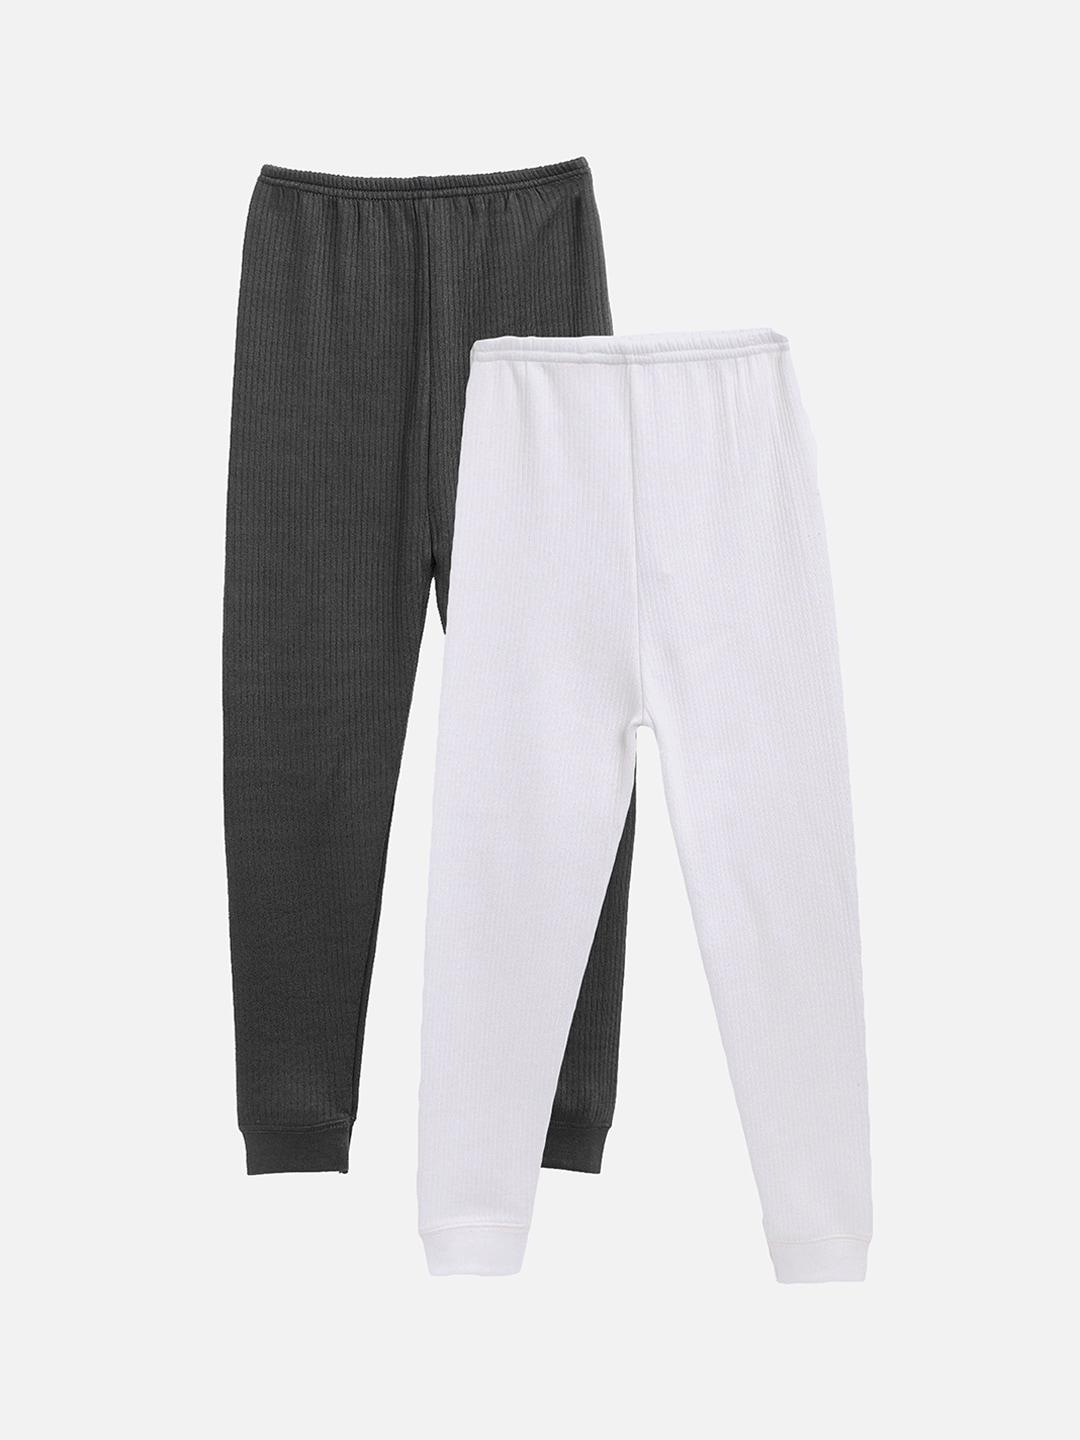 kanvin boys pack of 2 white and charcoal thermal bottoms